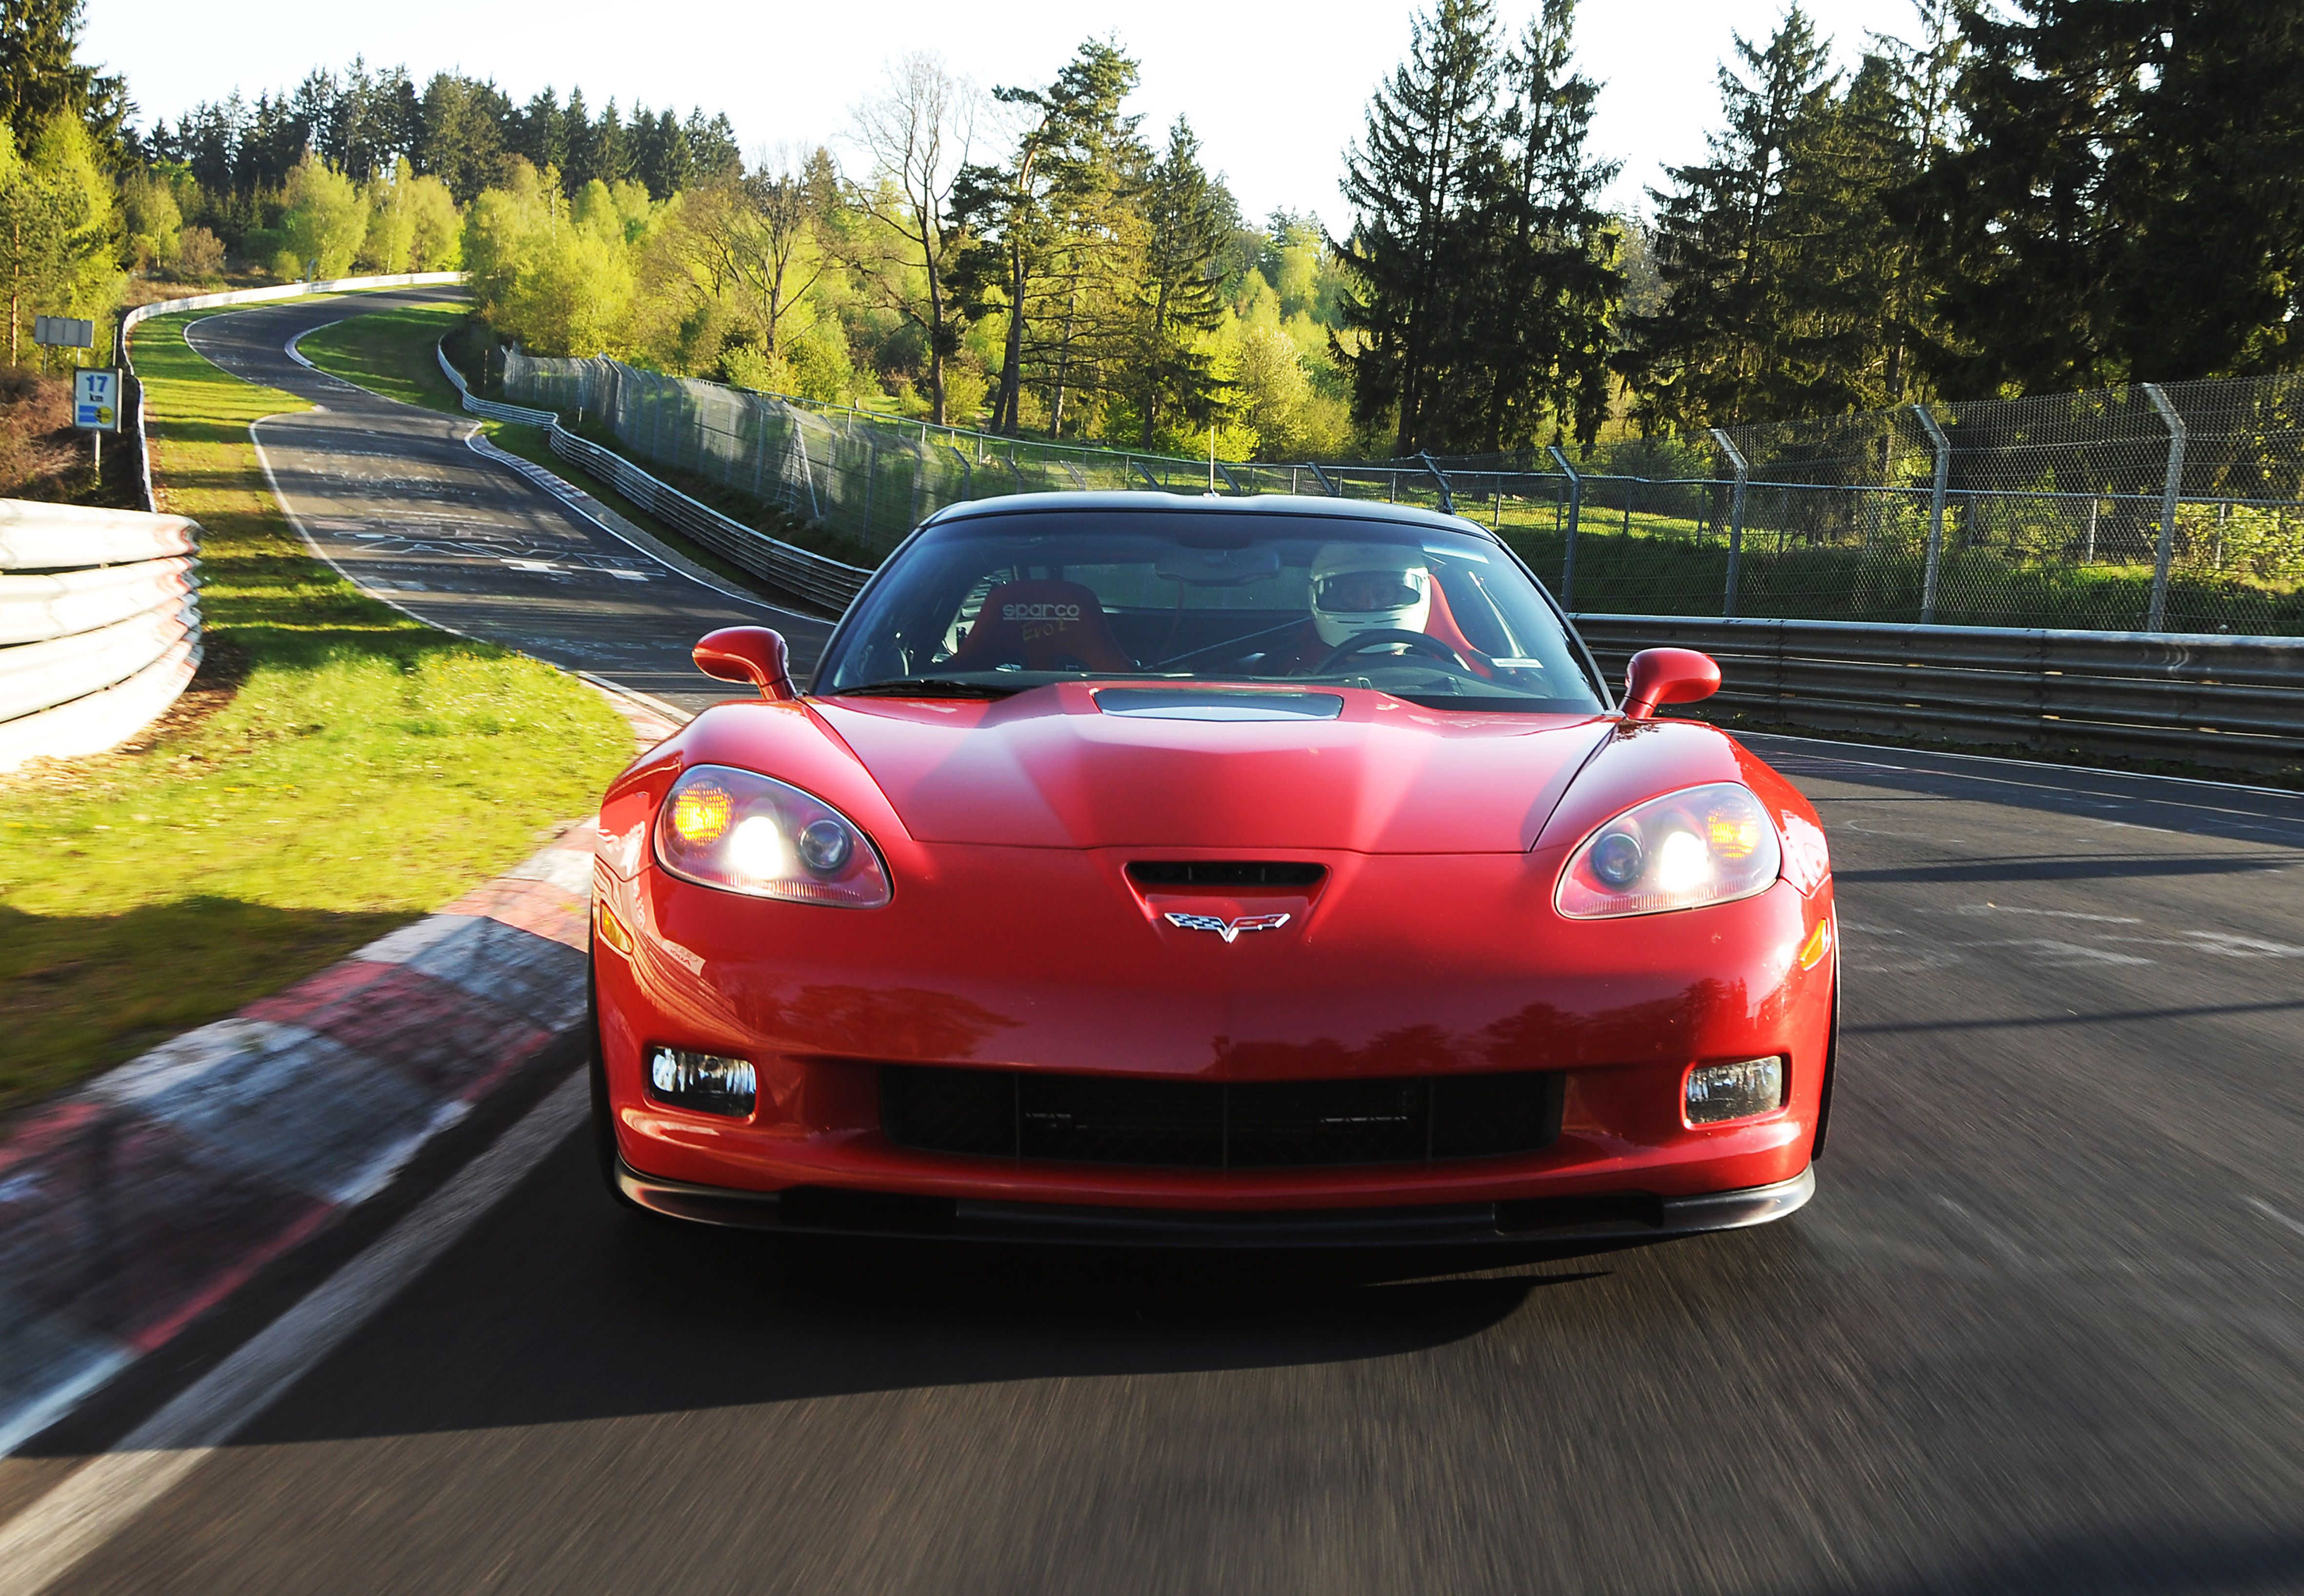 A closer look at the front of the 2009 Chevrolet Corvette ZR1.